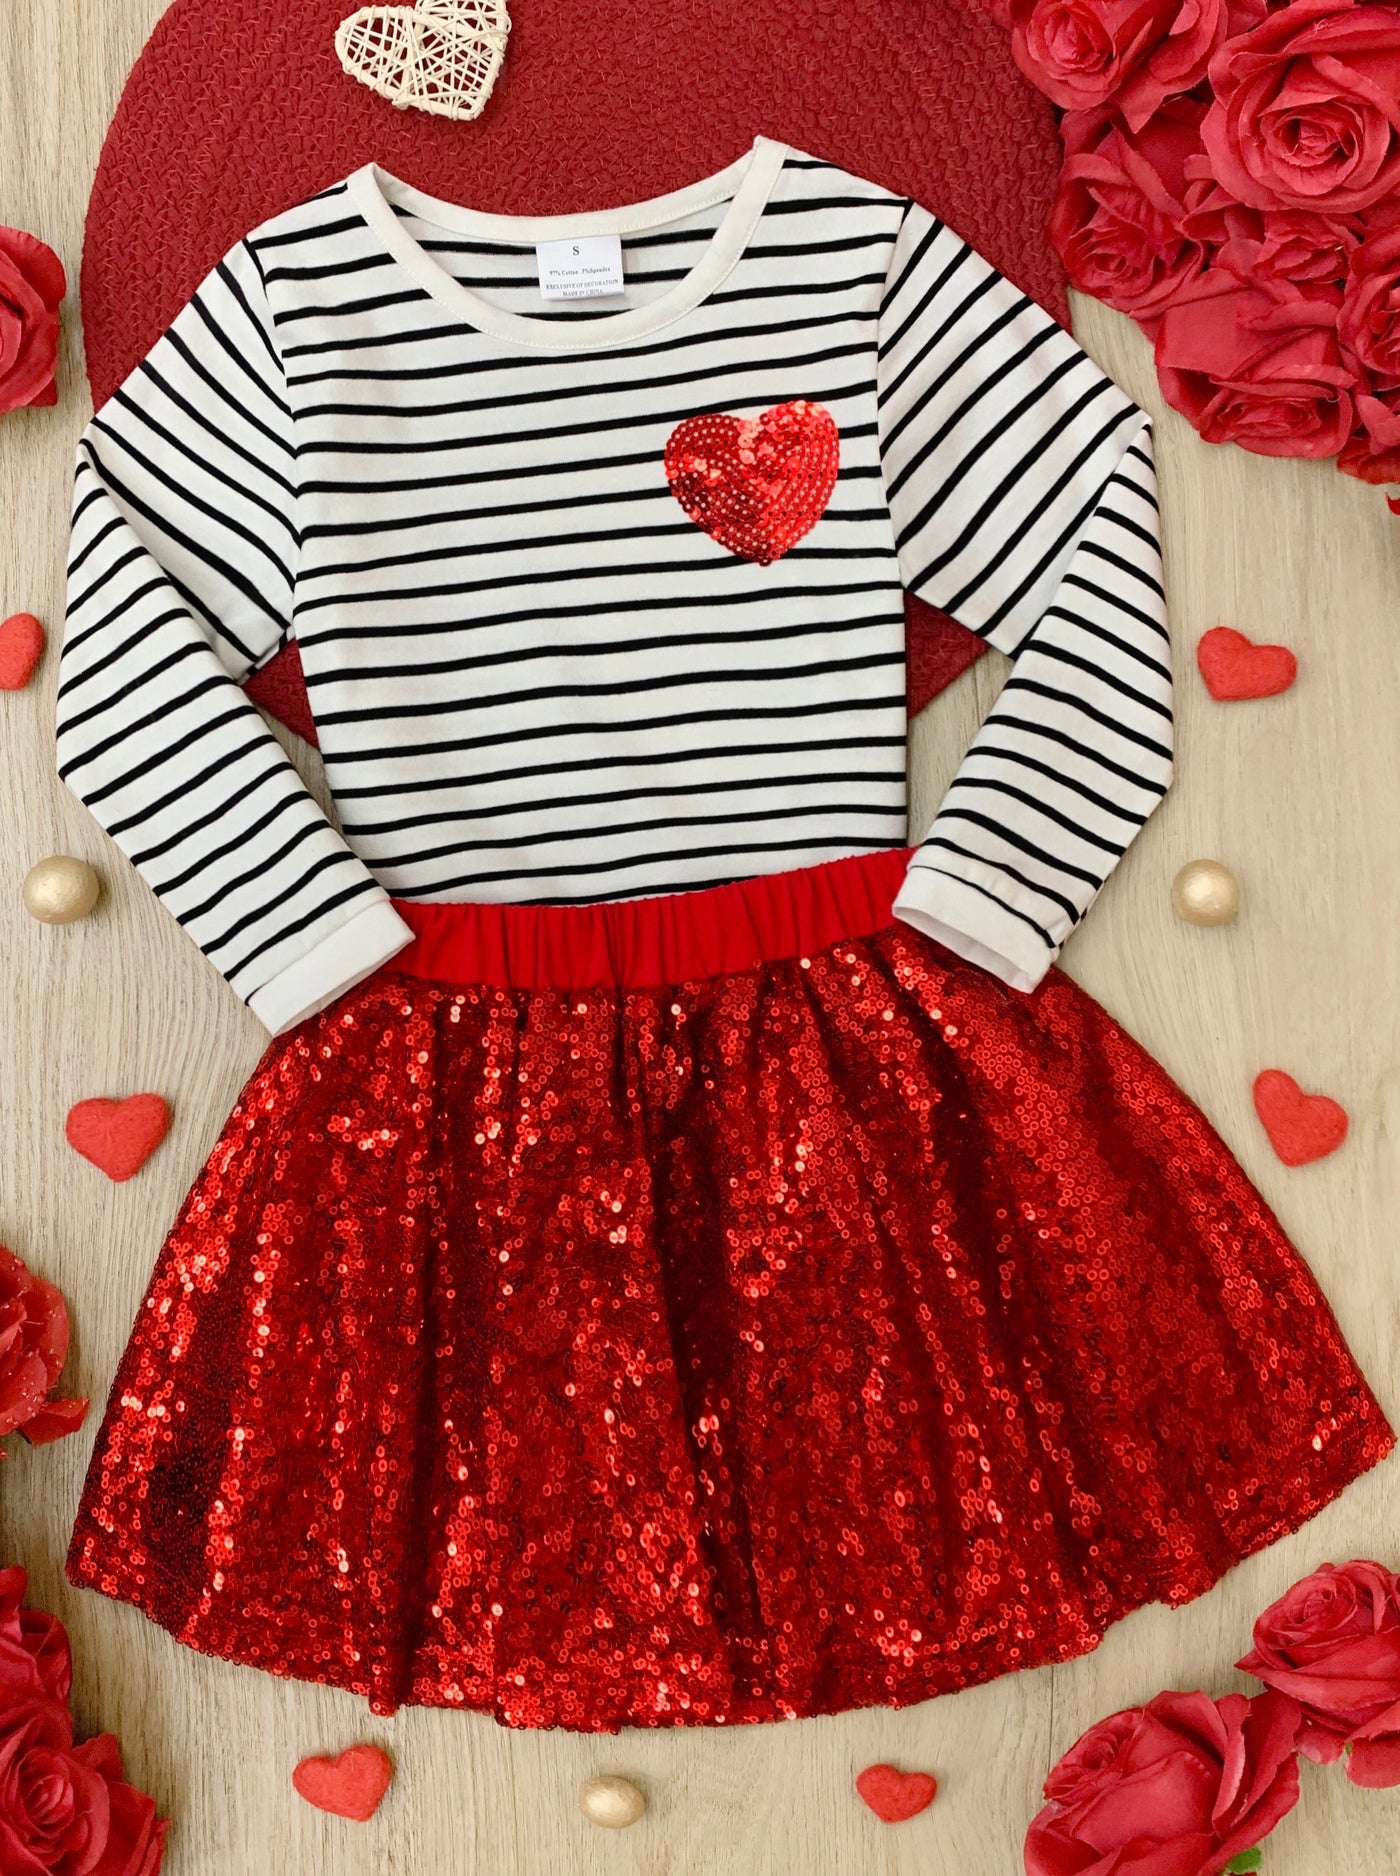 Toddler Valentine's Outfits | Girls Striped Top and Sequin Skirt Set ...